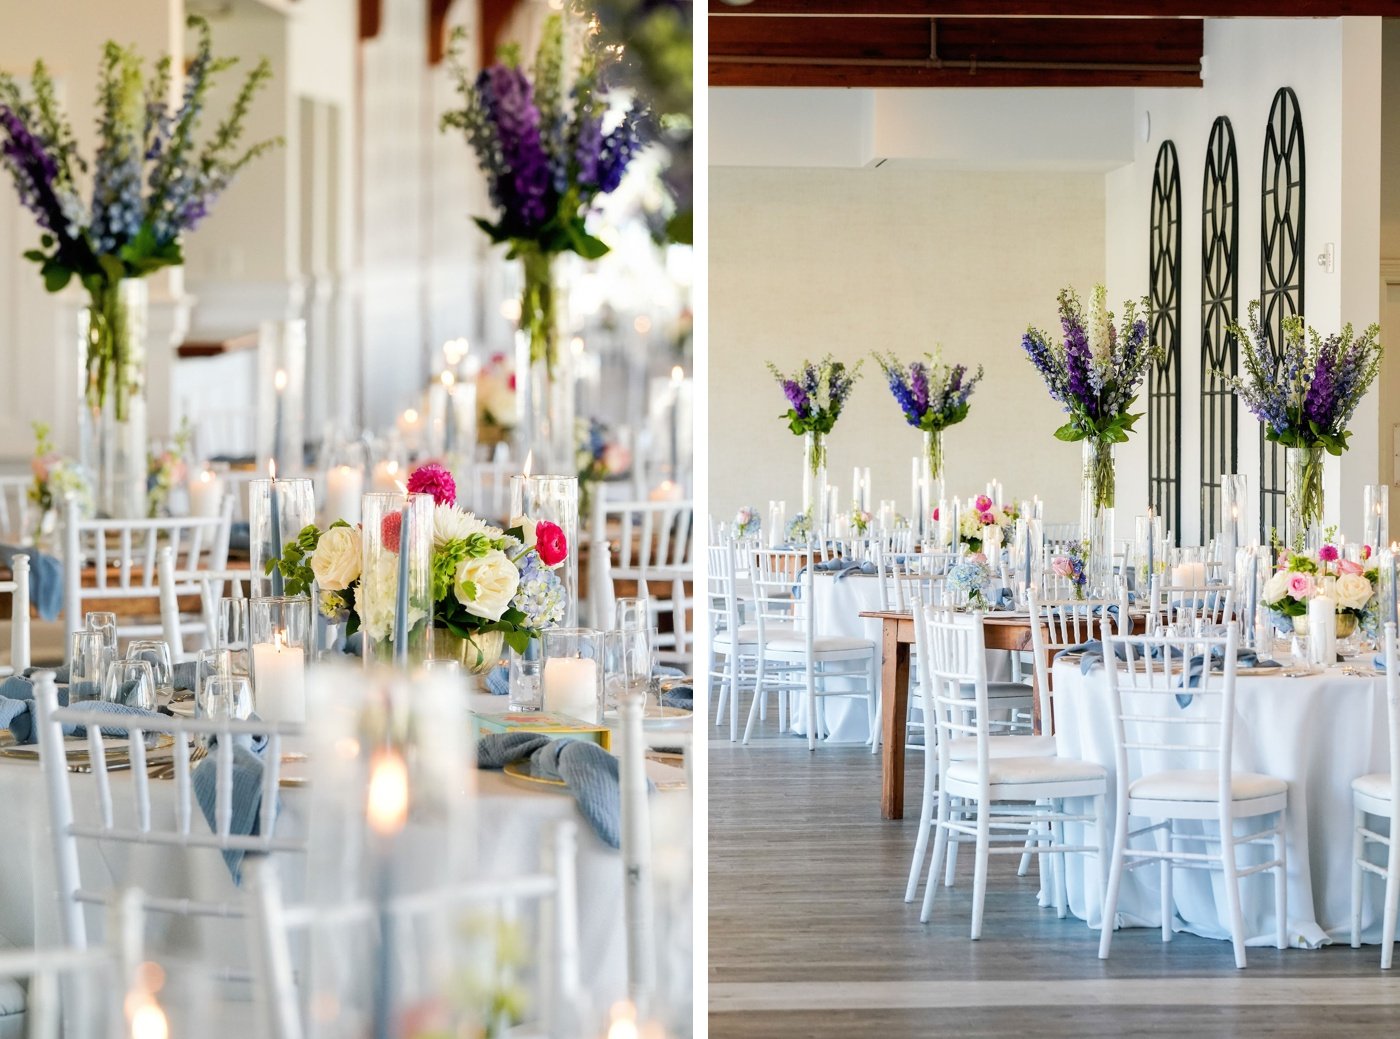 Farm tables with dusty blue linens and vases of purple delphinium at a coastal wedding reception